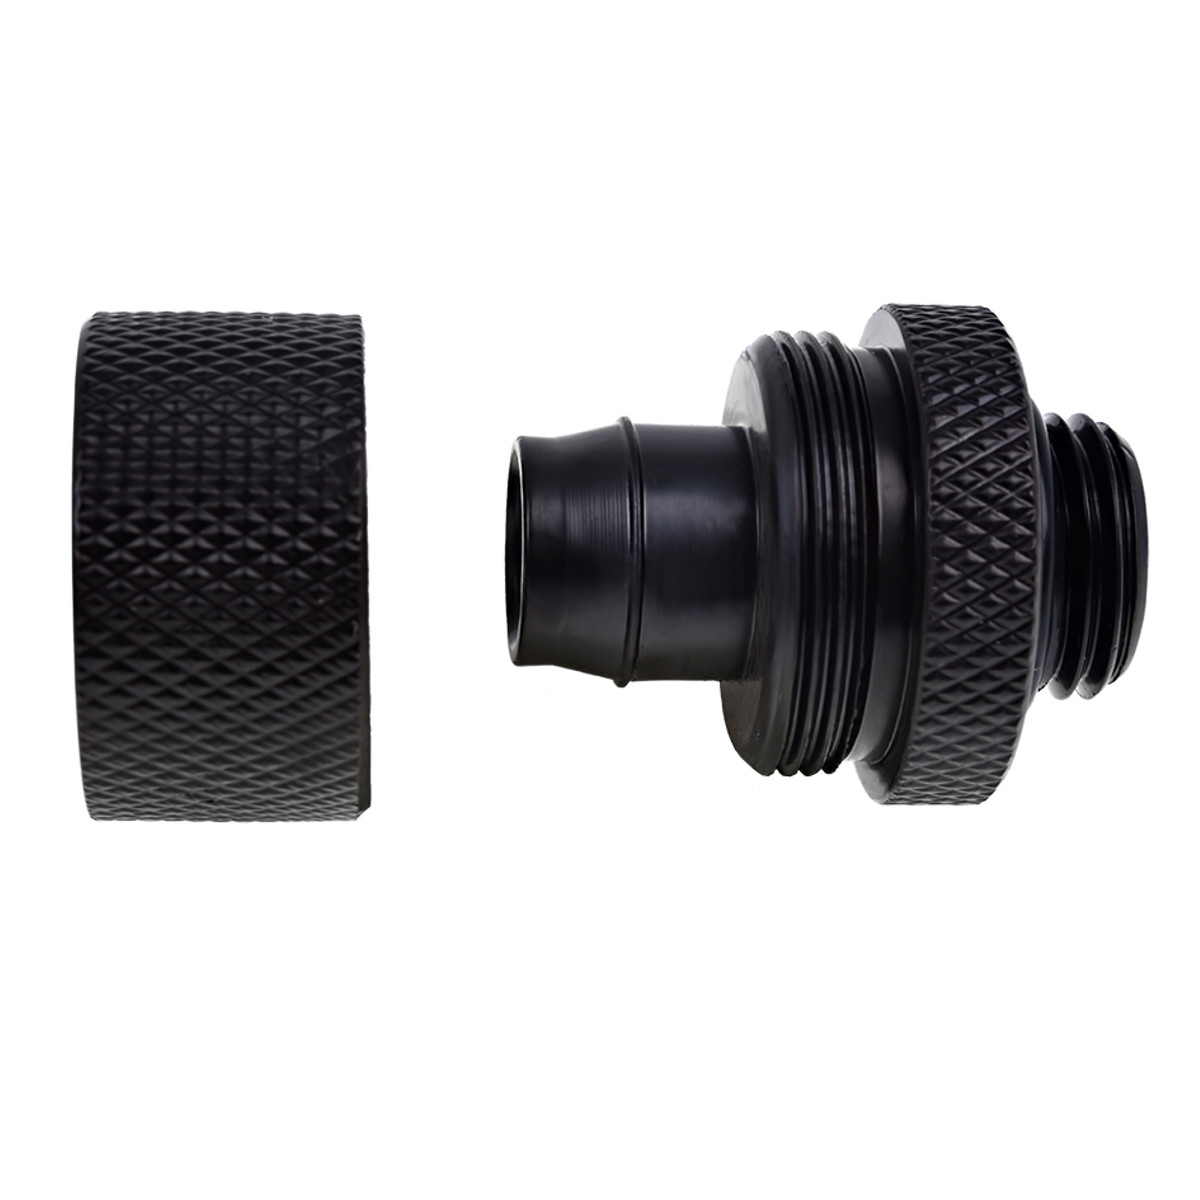 Alphacool - Alphacool Eiszapfen 16/10mm Deep Black Compression Fitting - Six Pack